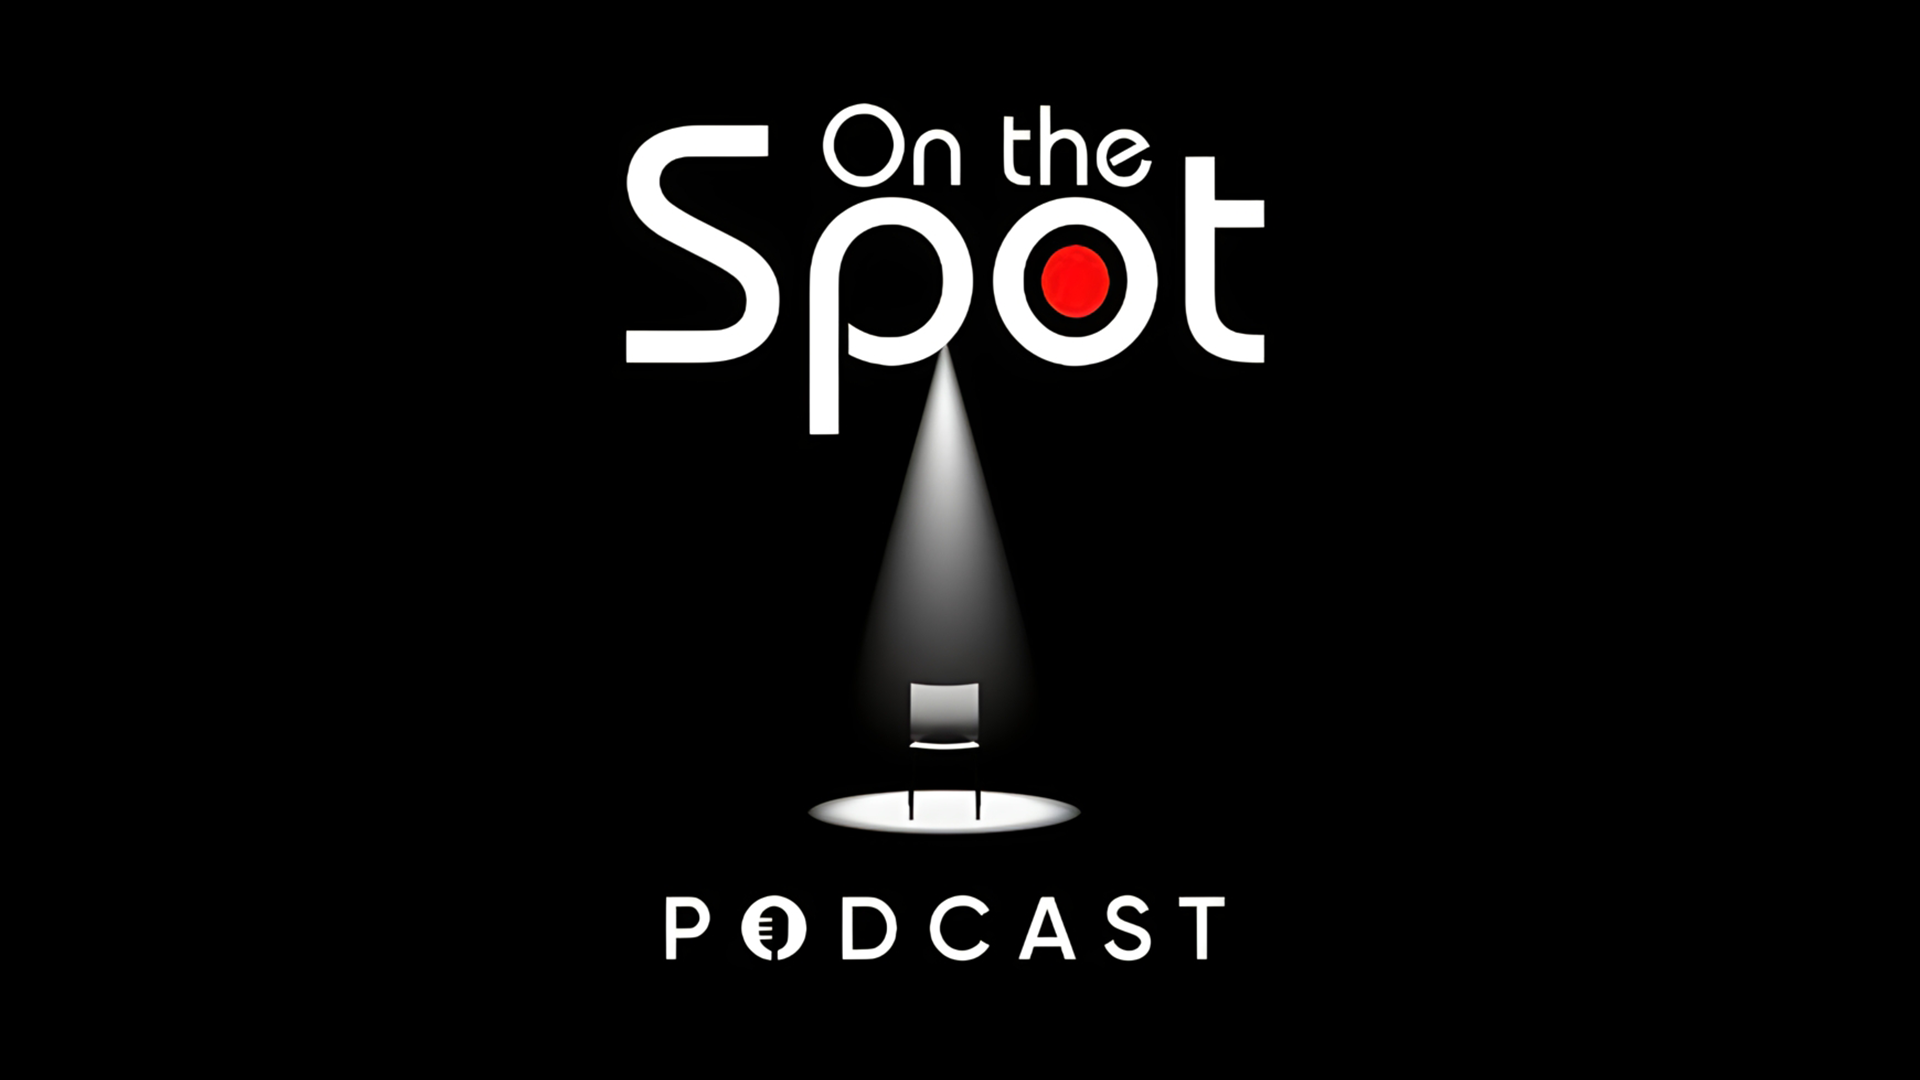 On The Spot Podcast